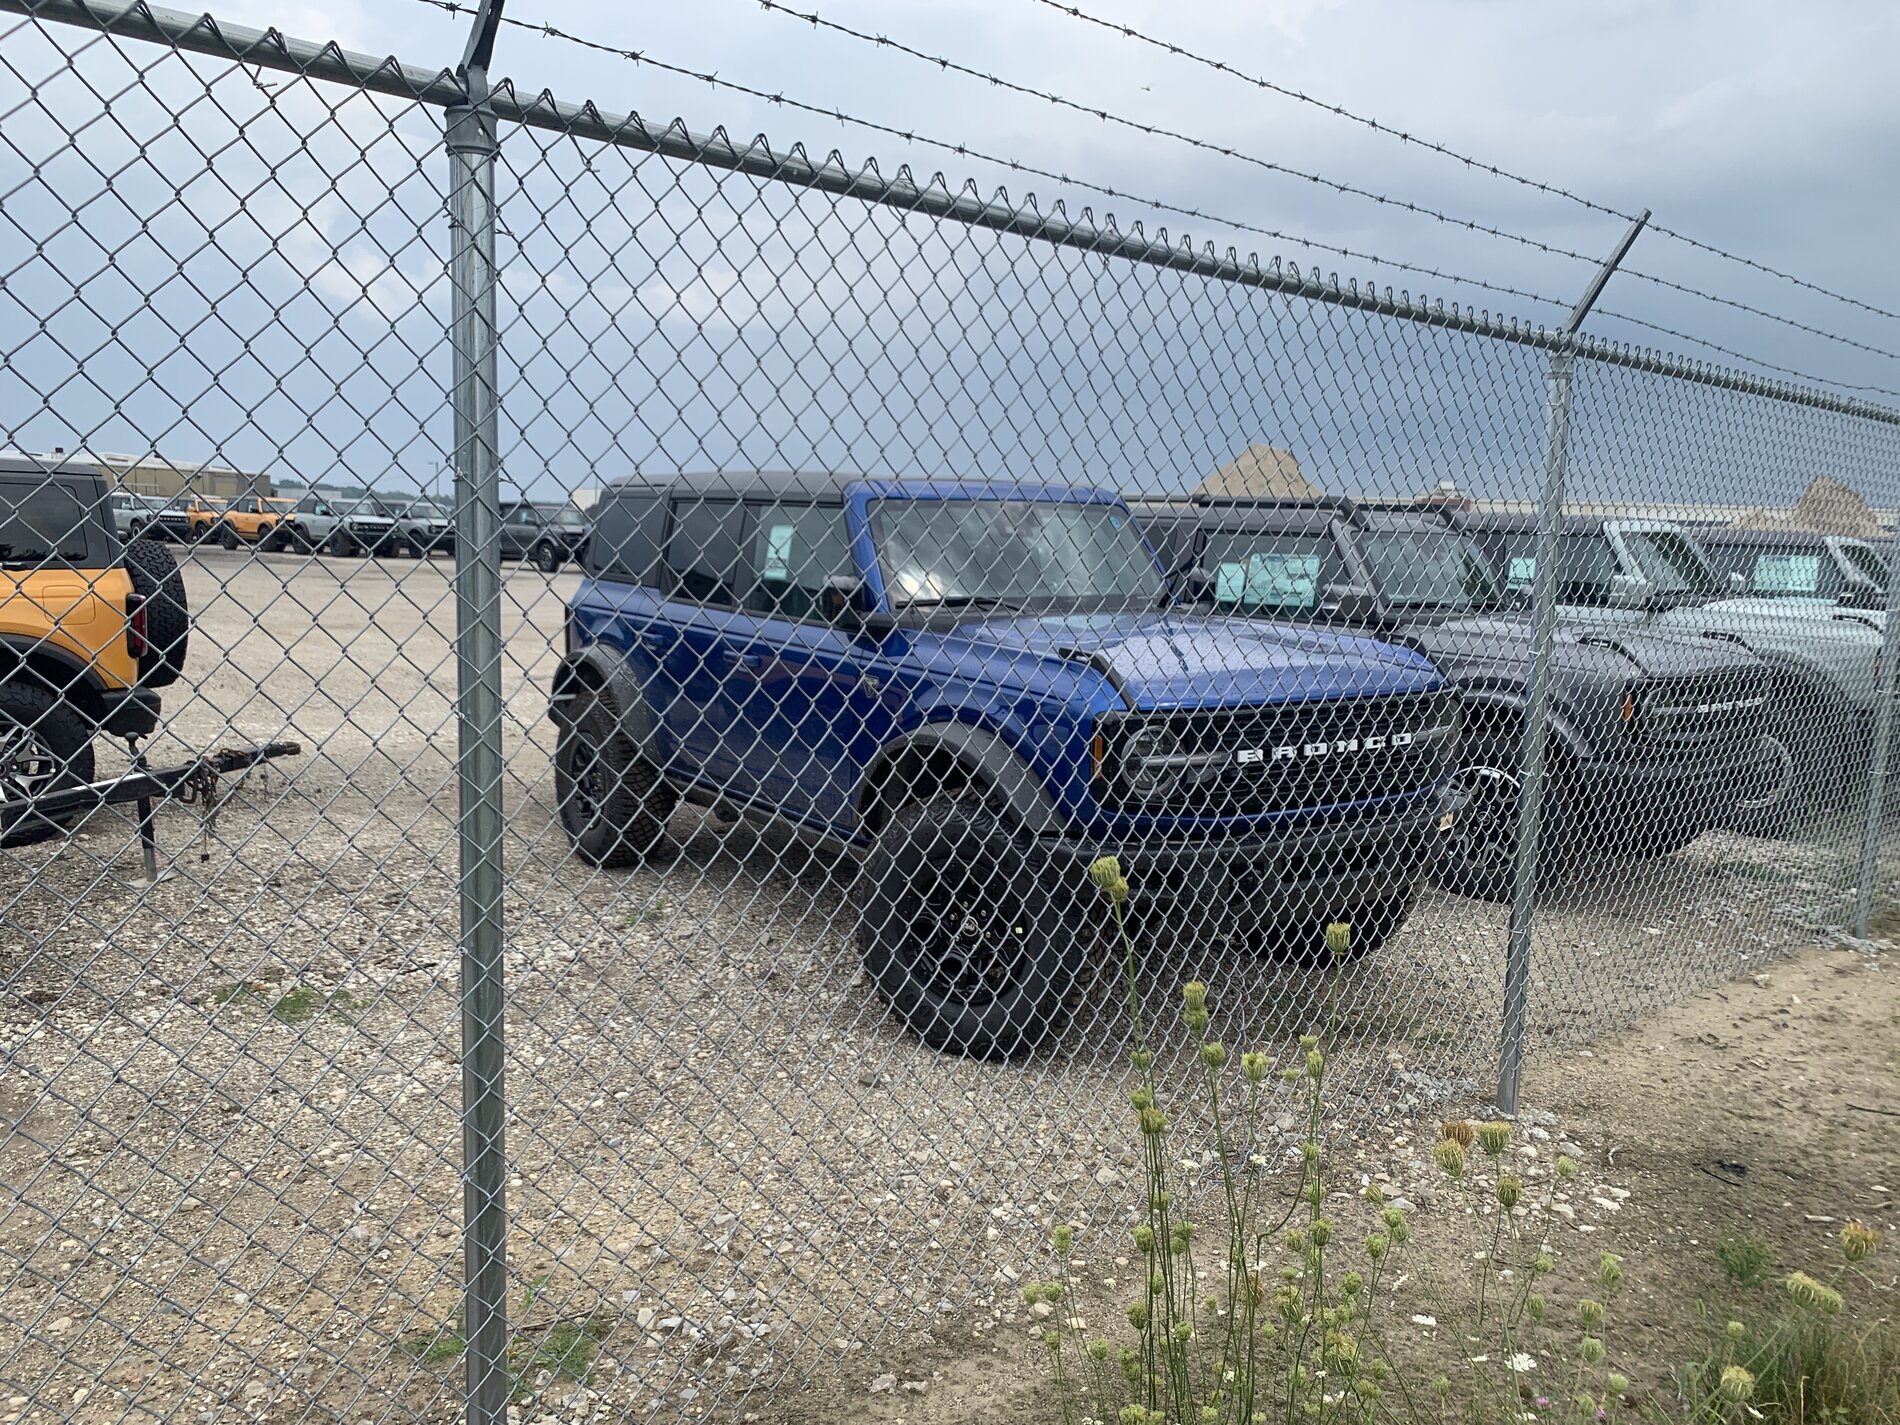 Ford Bronco [Bronco Lot Video] Looking For Yours Stuck in Limbo? giphy